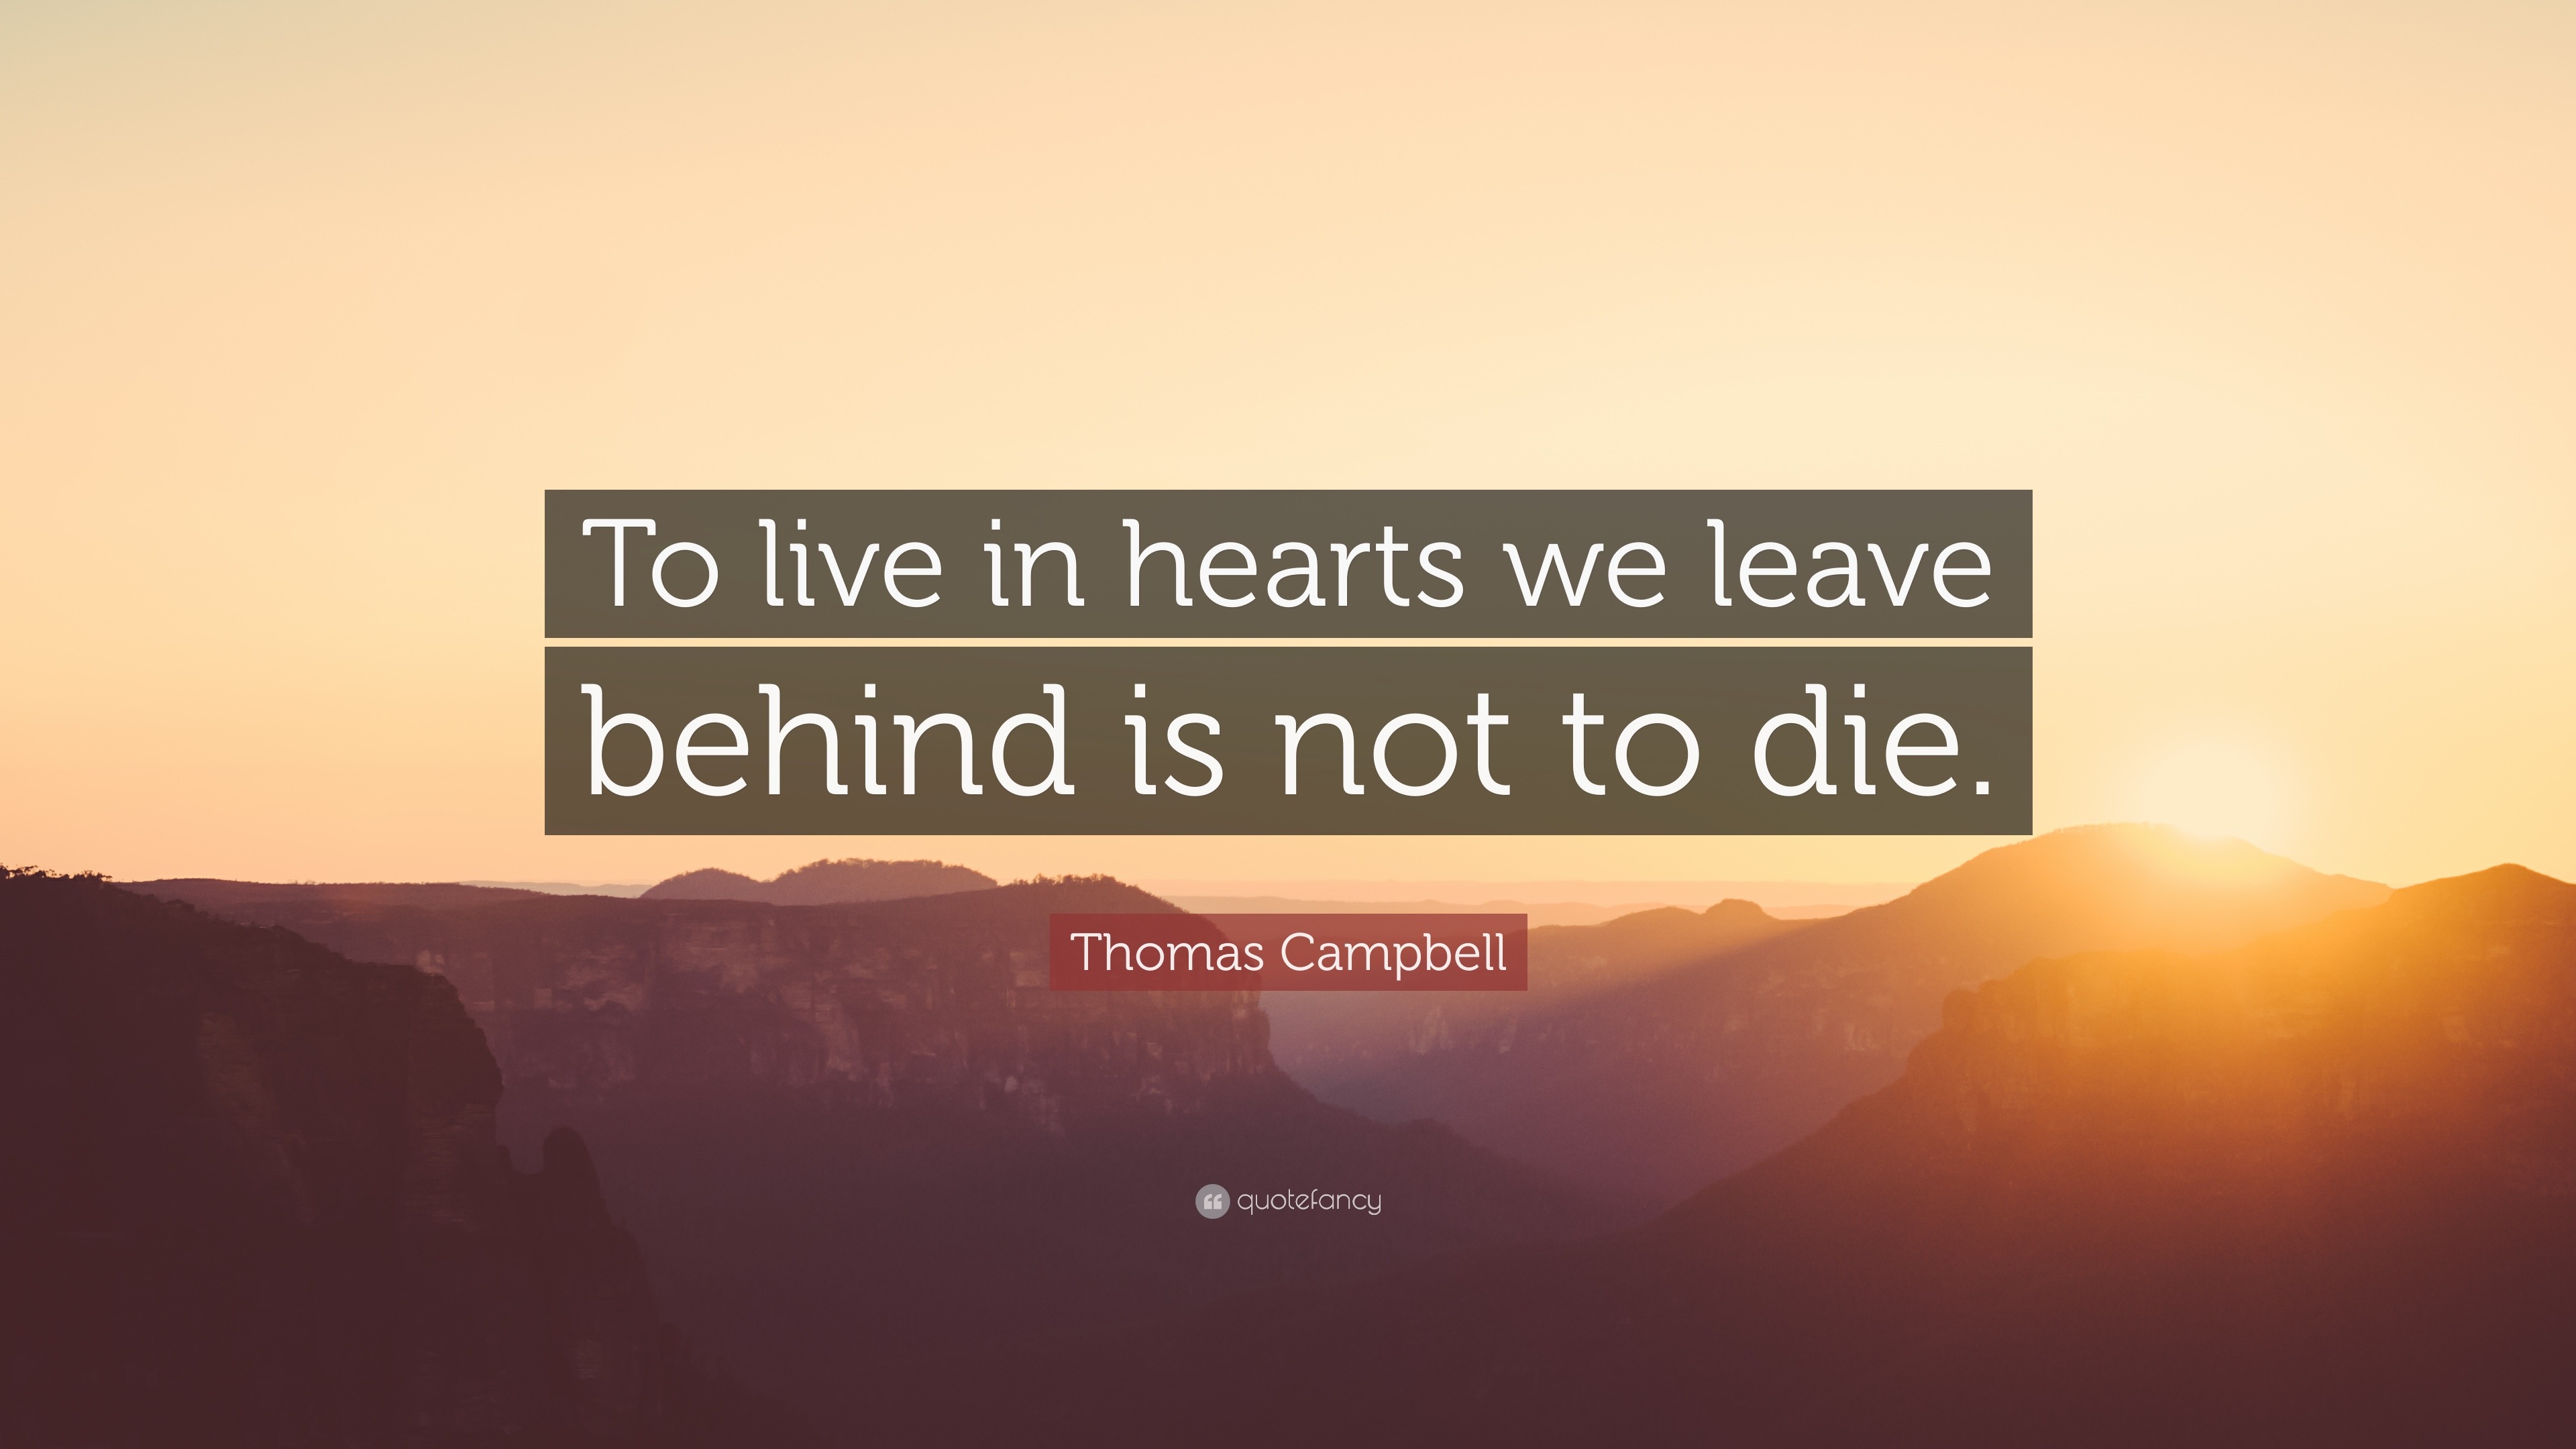 356454 Thomas Campbell Quote To live in hearts we leave behind is not to